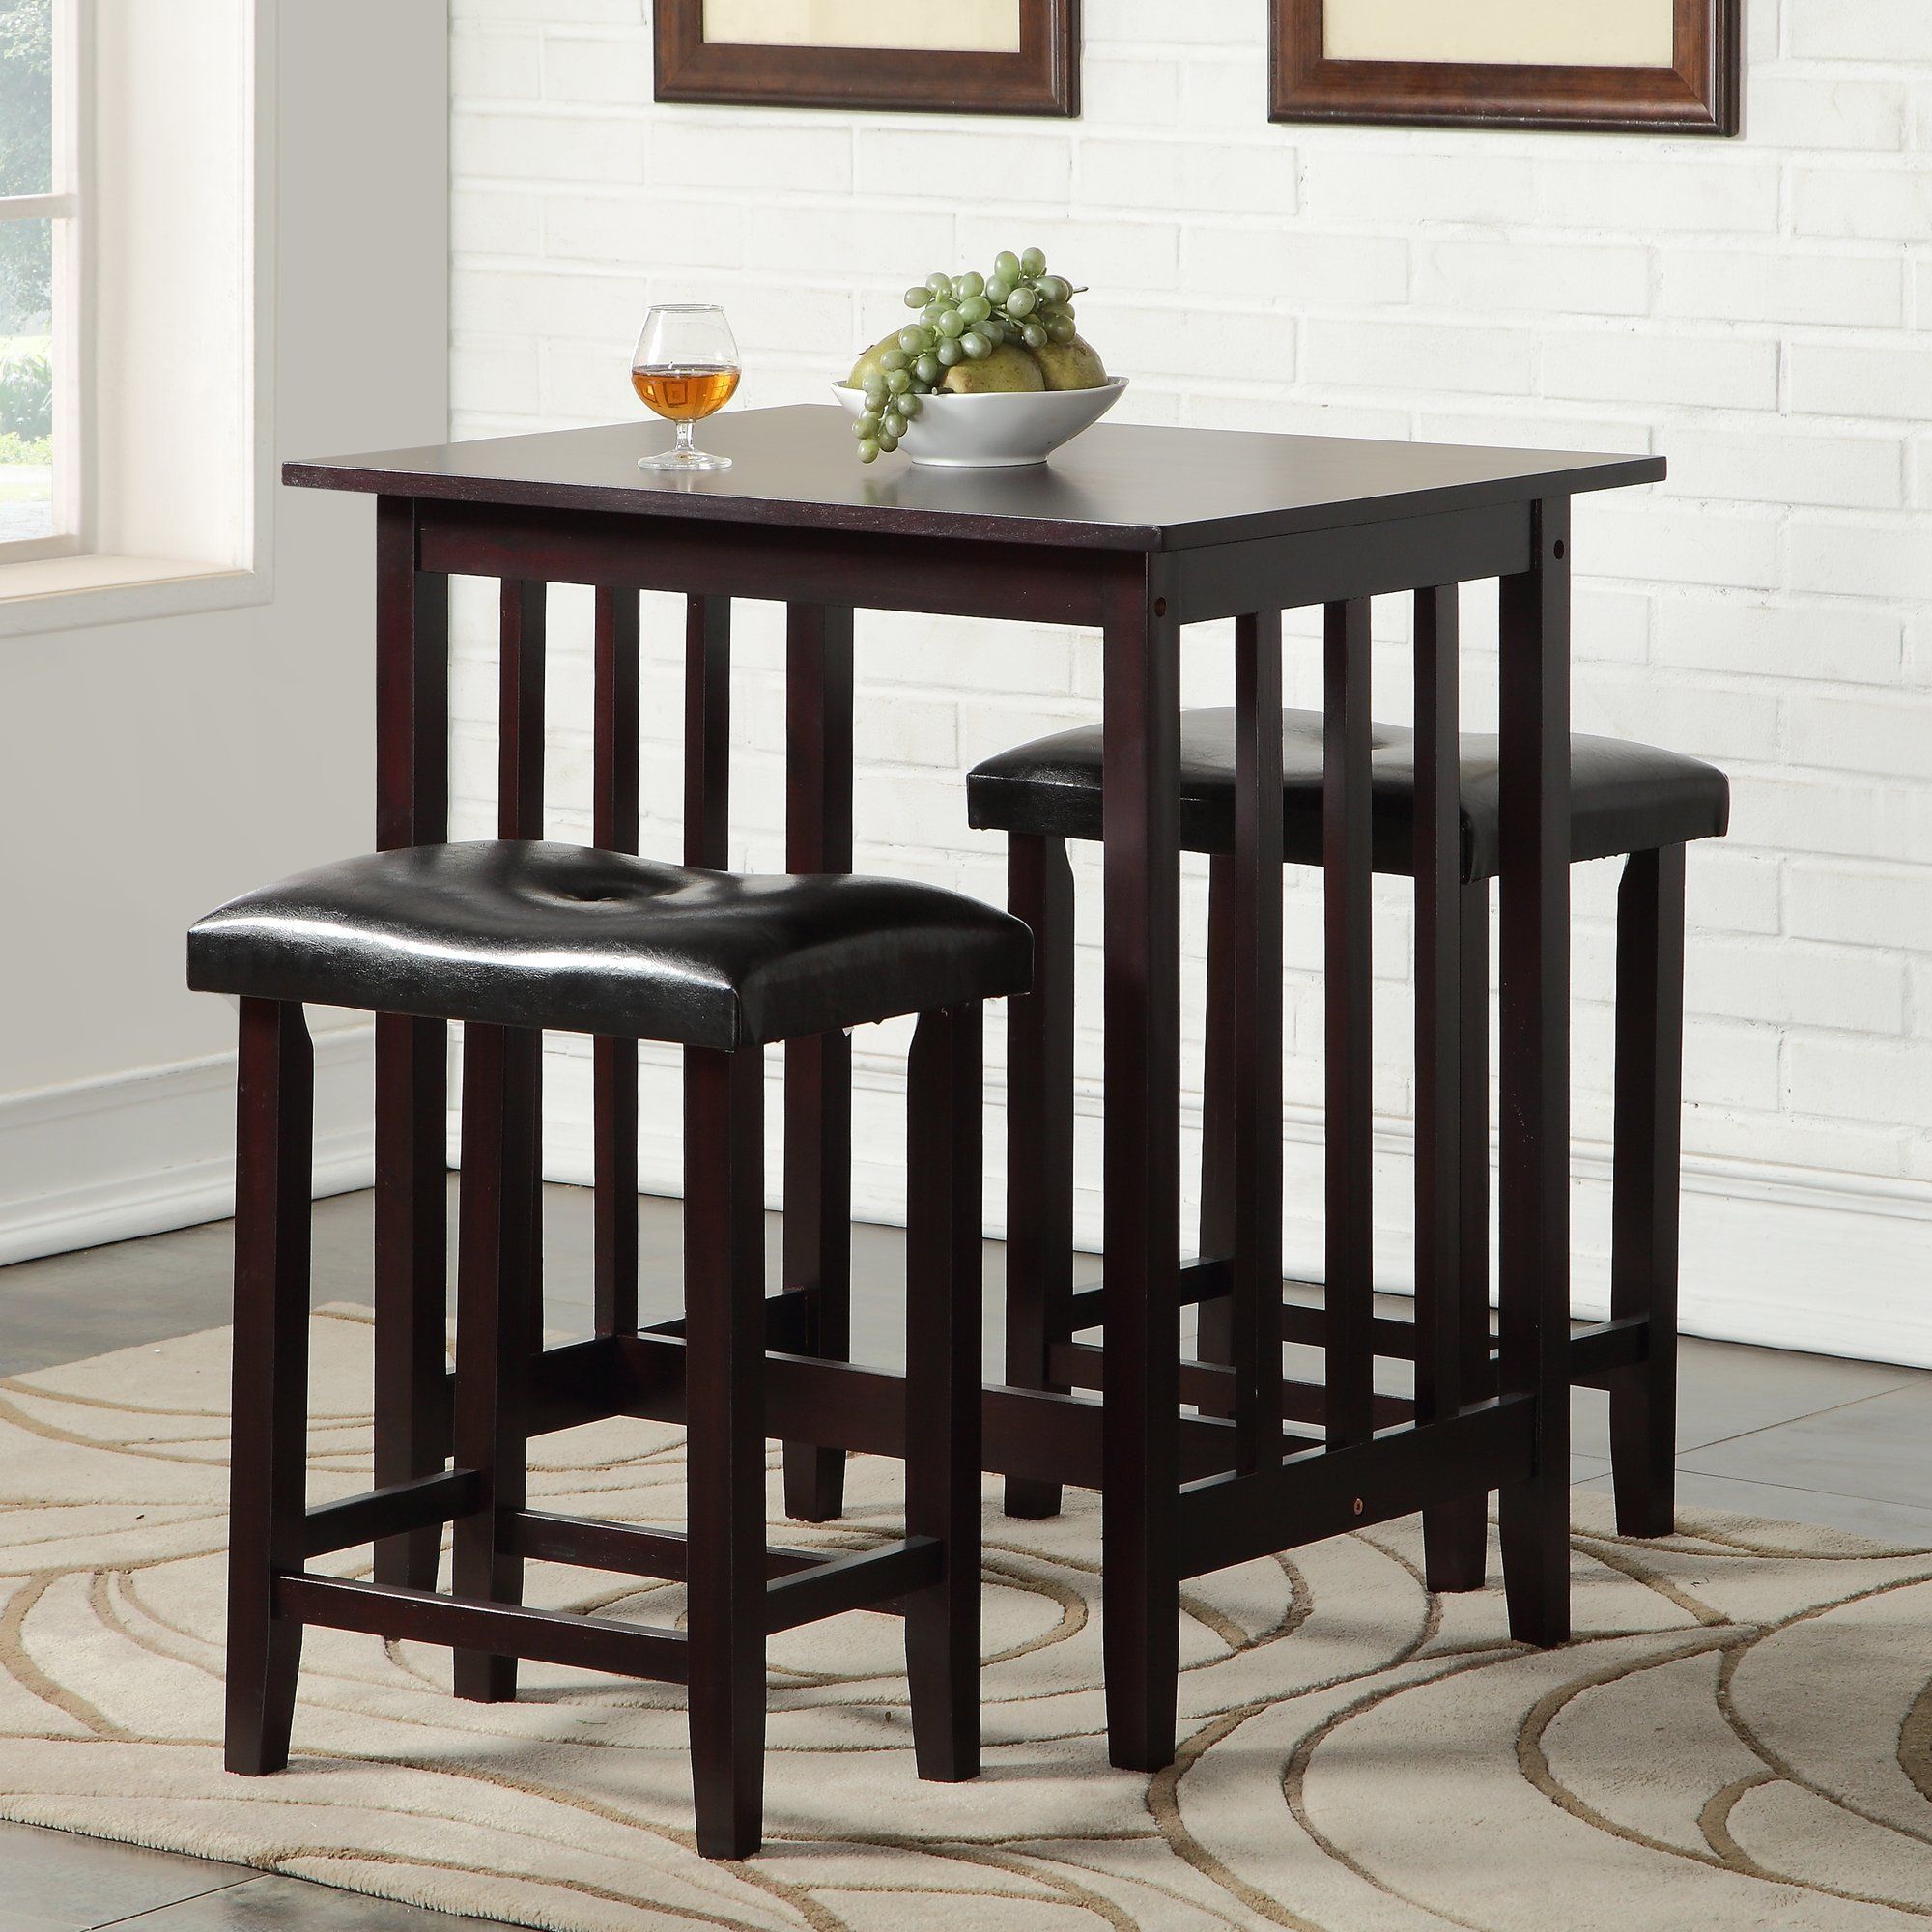 Richland 3 Piece Counter Height Pub Table Set (View 8 of 20)